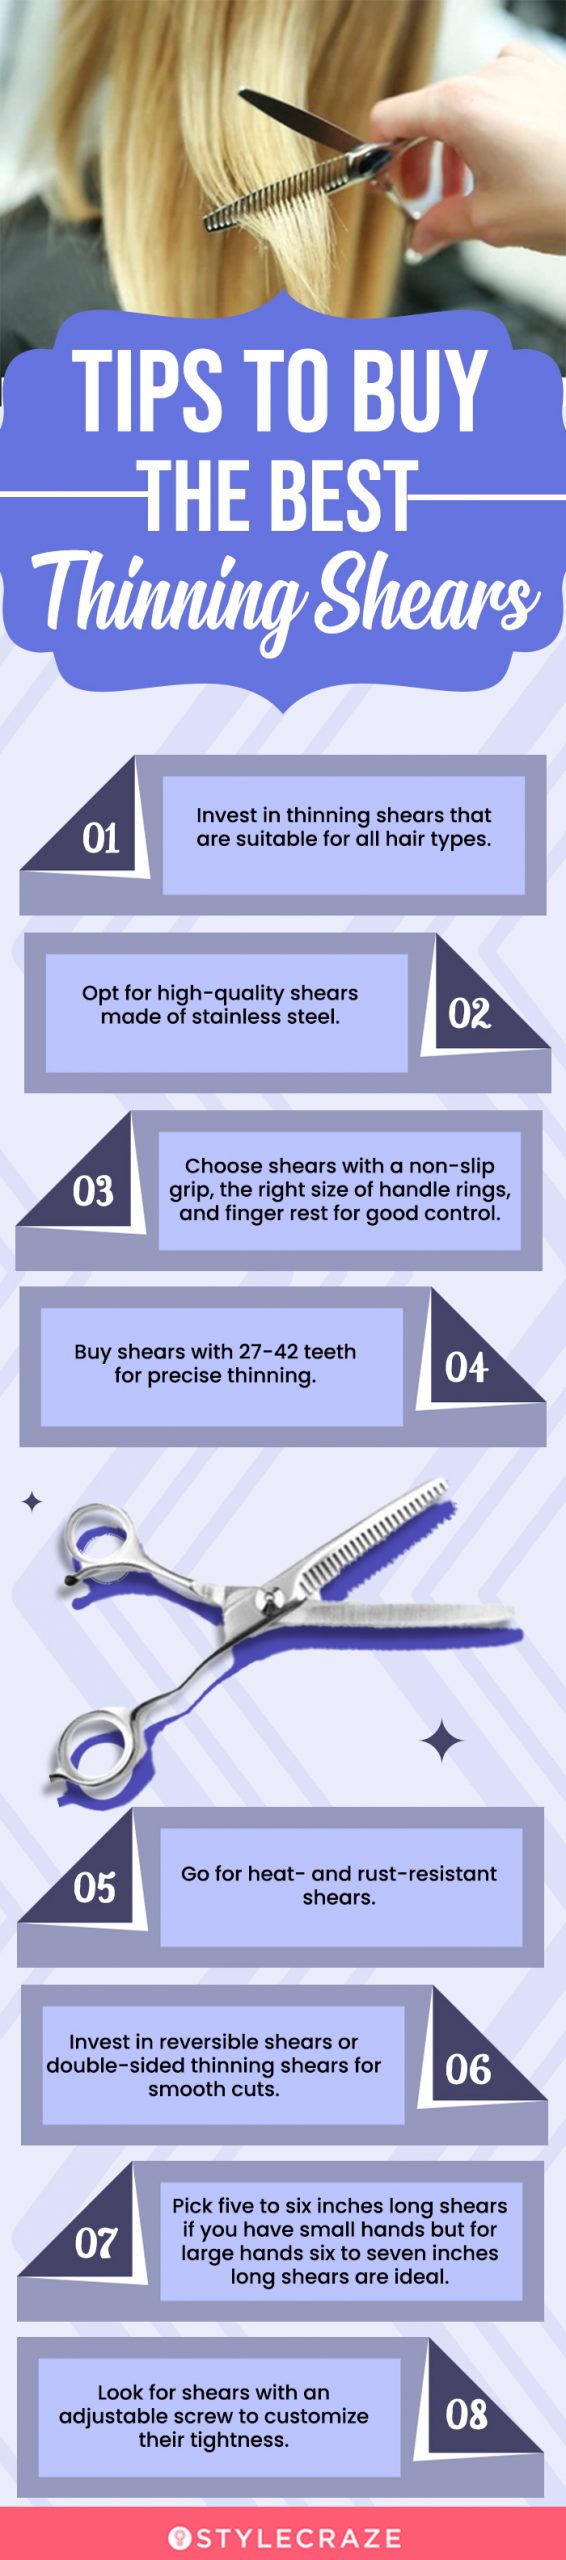 Tips To Buy The Best Thinning Shear (infographic)